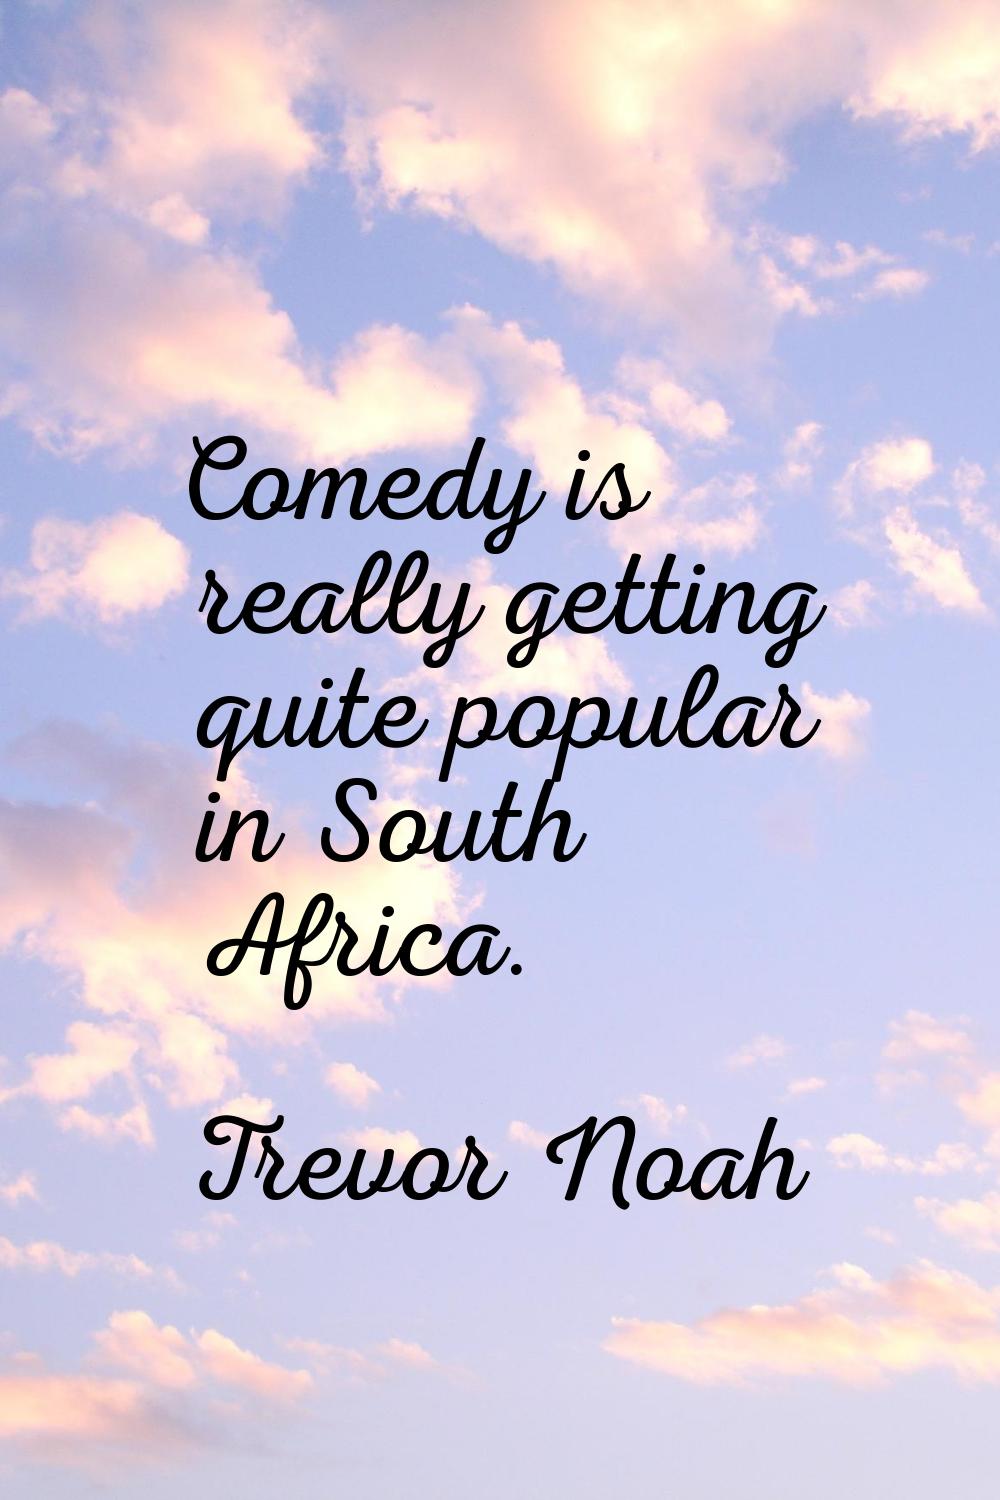 Comedy is really getting quite popular in South Africa.